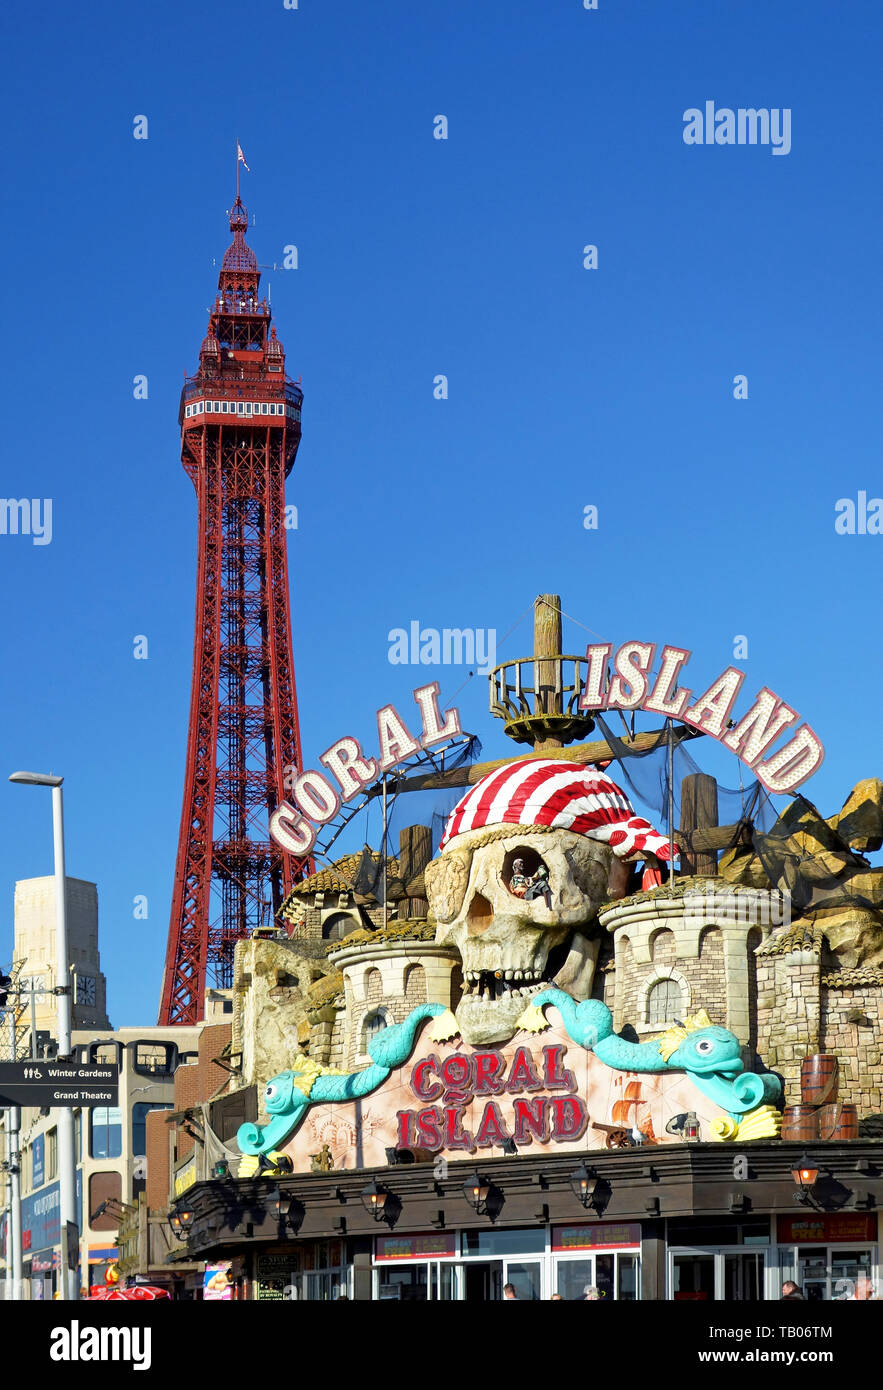 The famous Blackpool  looms over the Coral Island amusement complex in Blackpool, Lancashire, England, UK Stock Photo